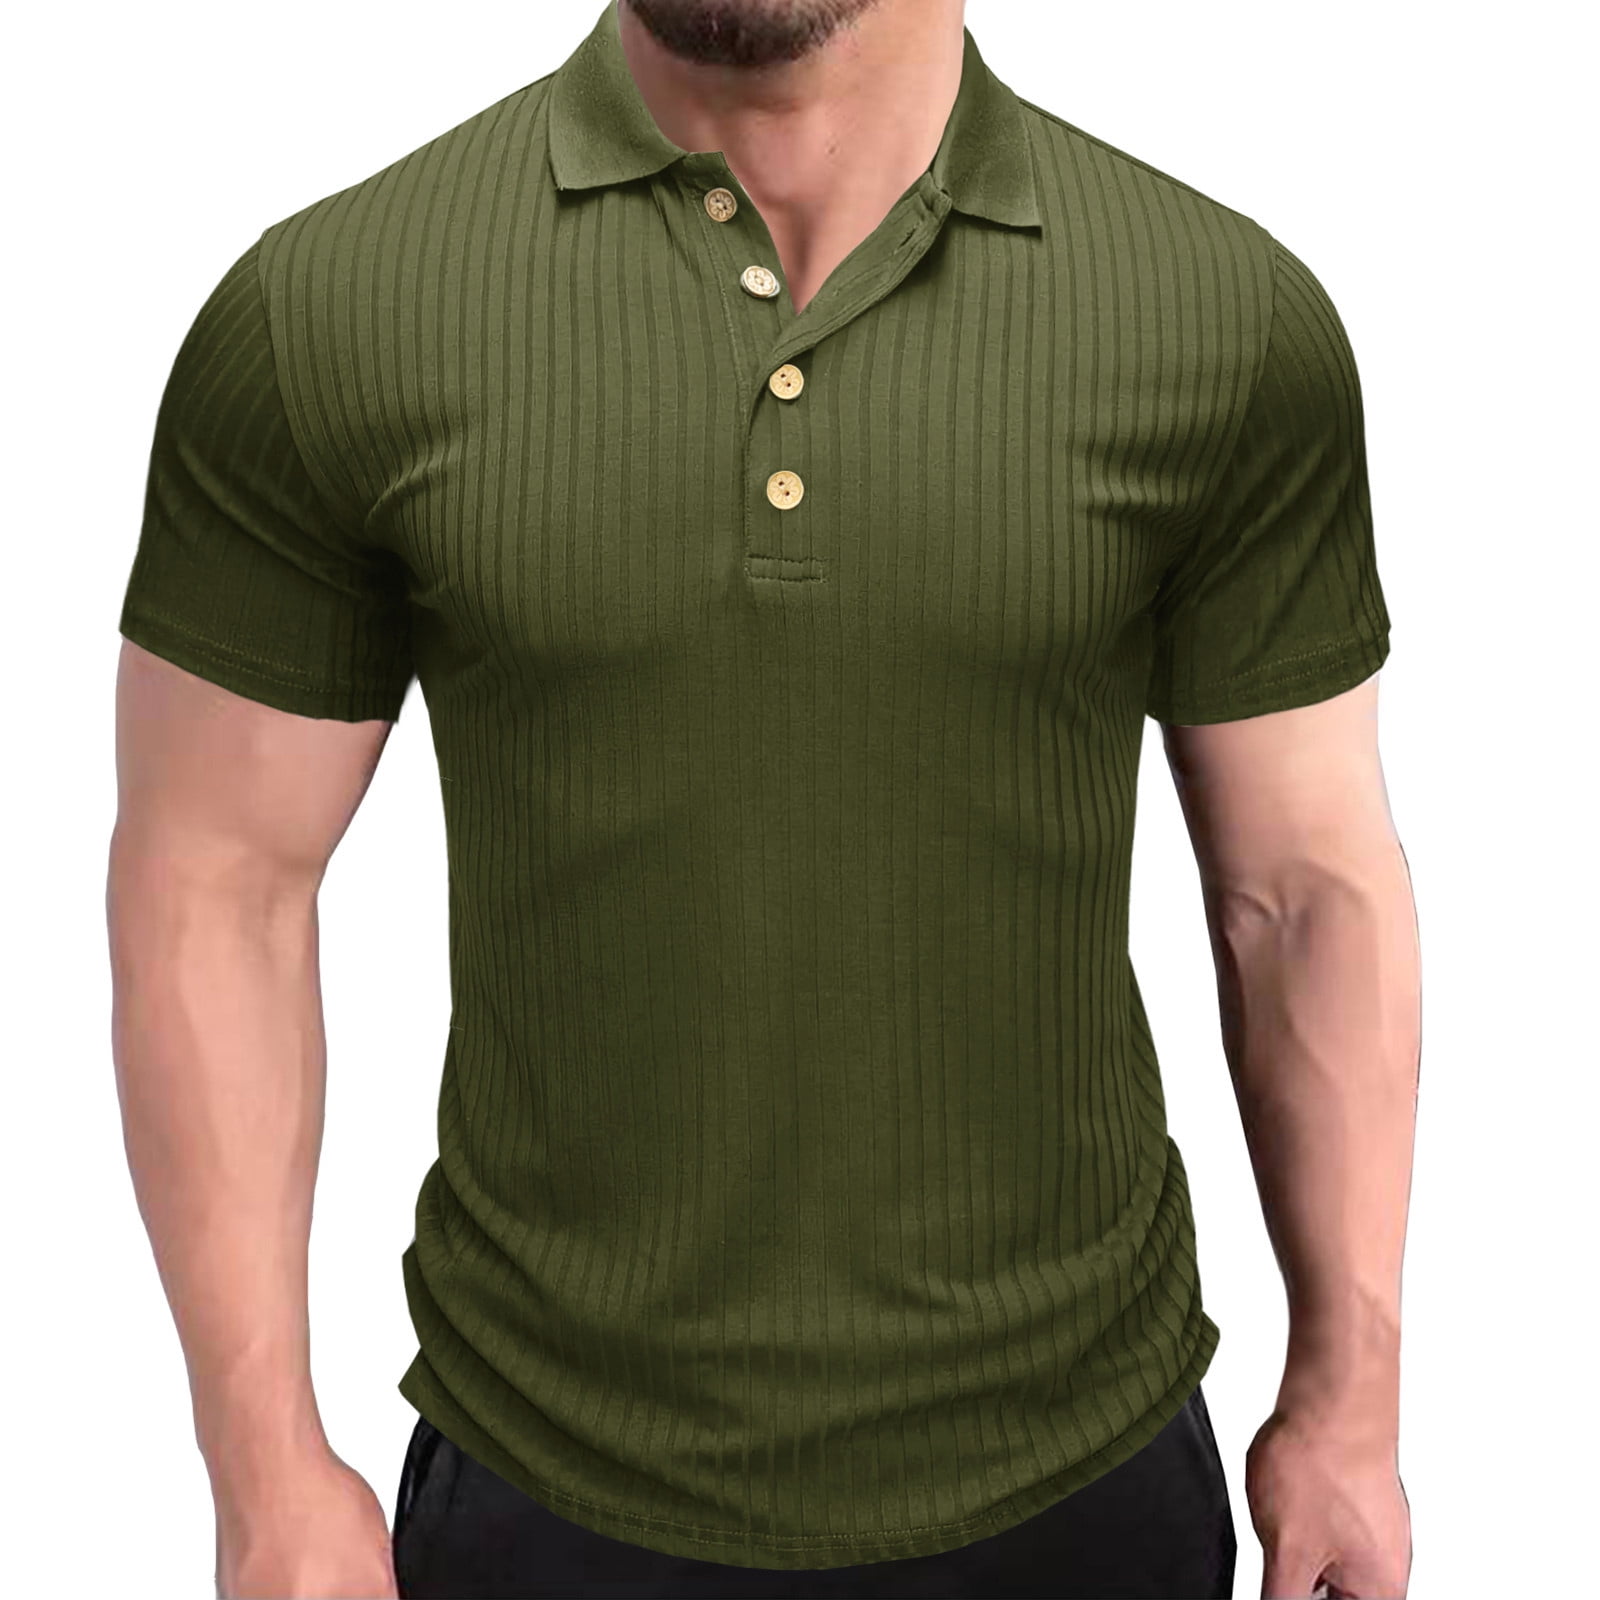 Branded Shirts - Buy Branded Shirts Online in India